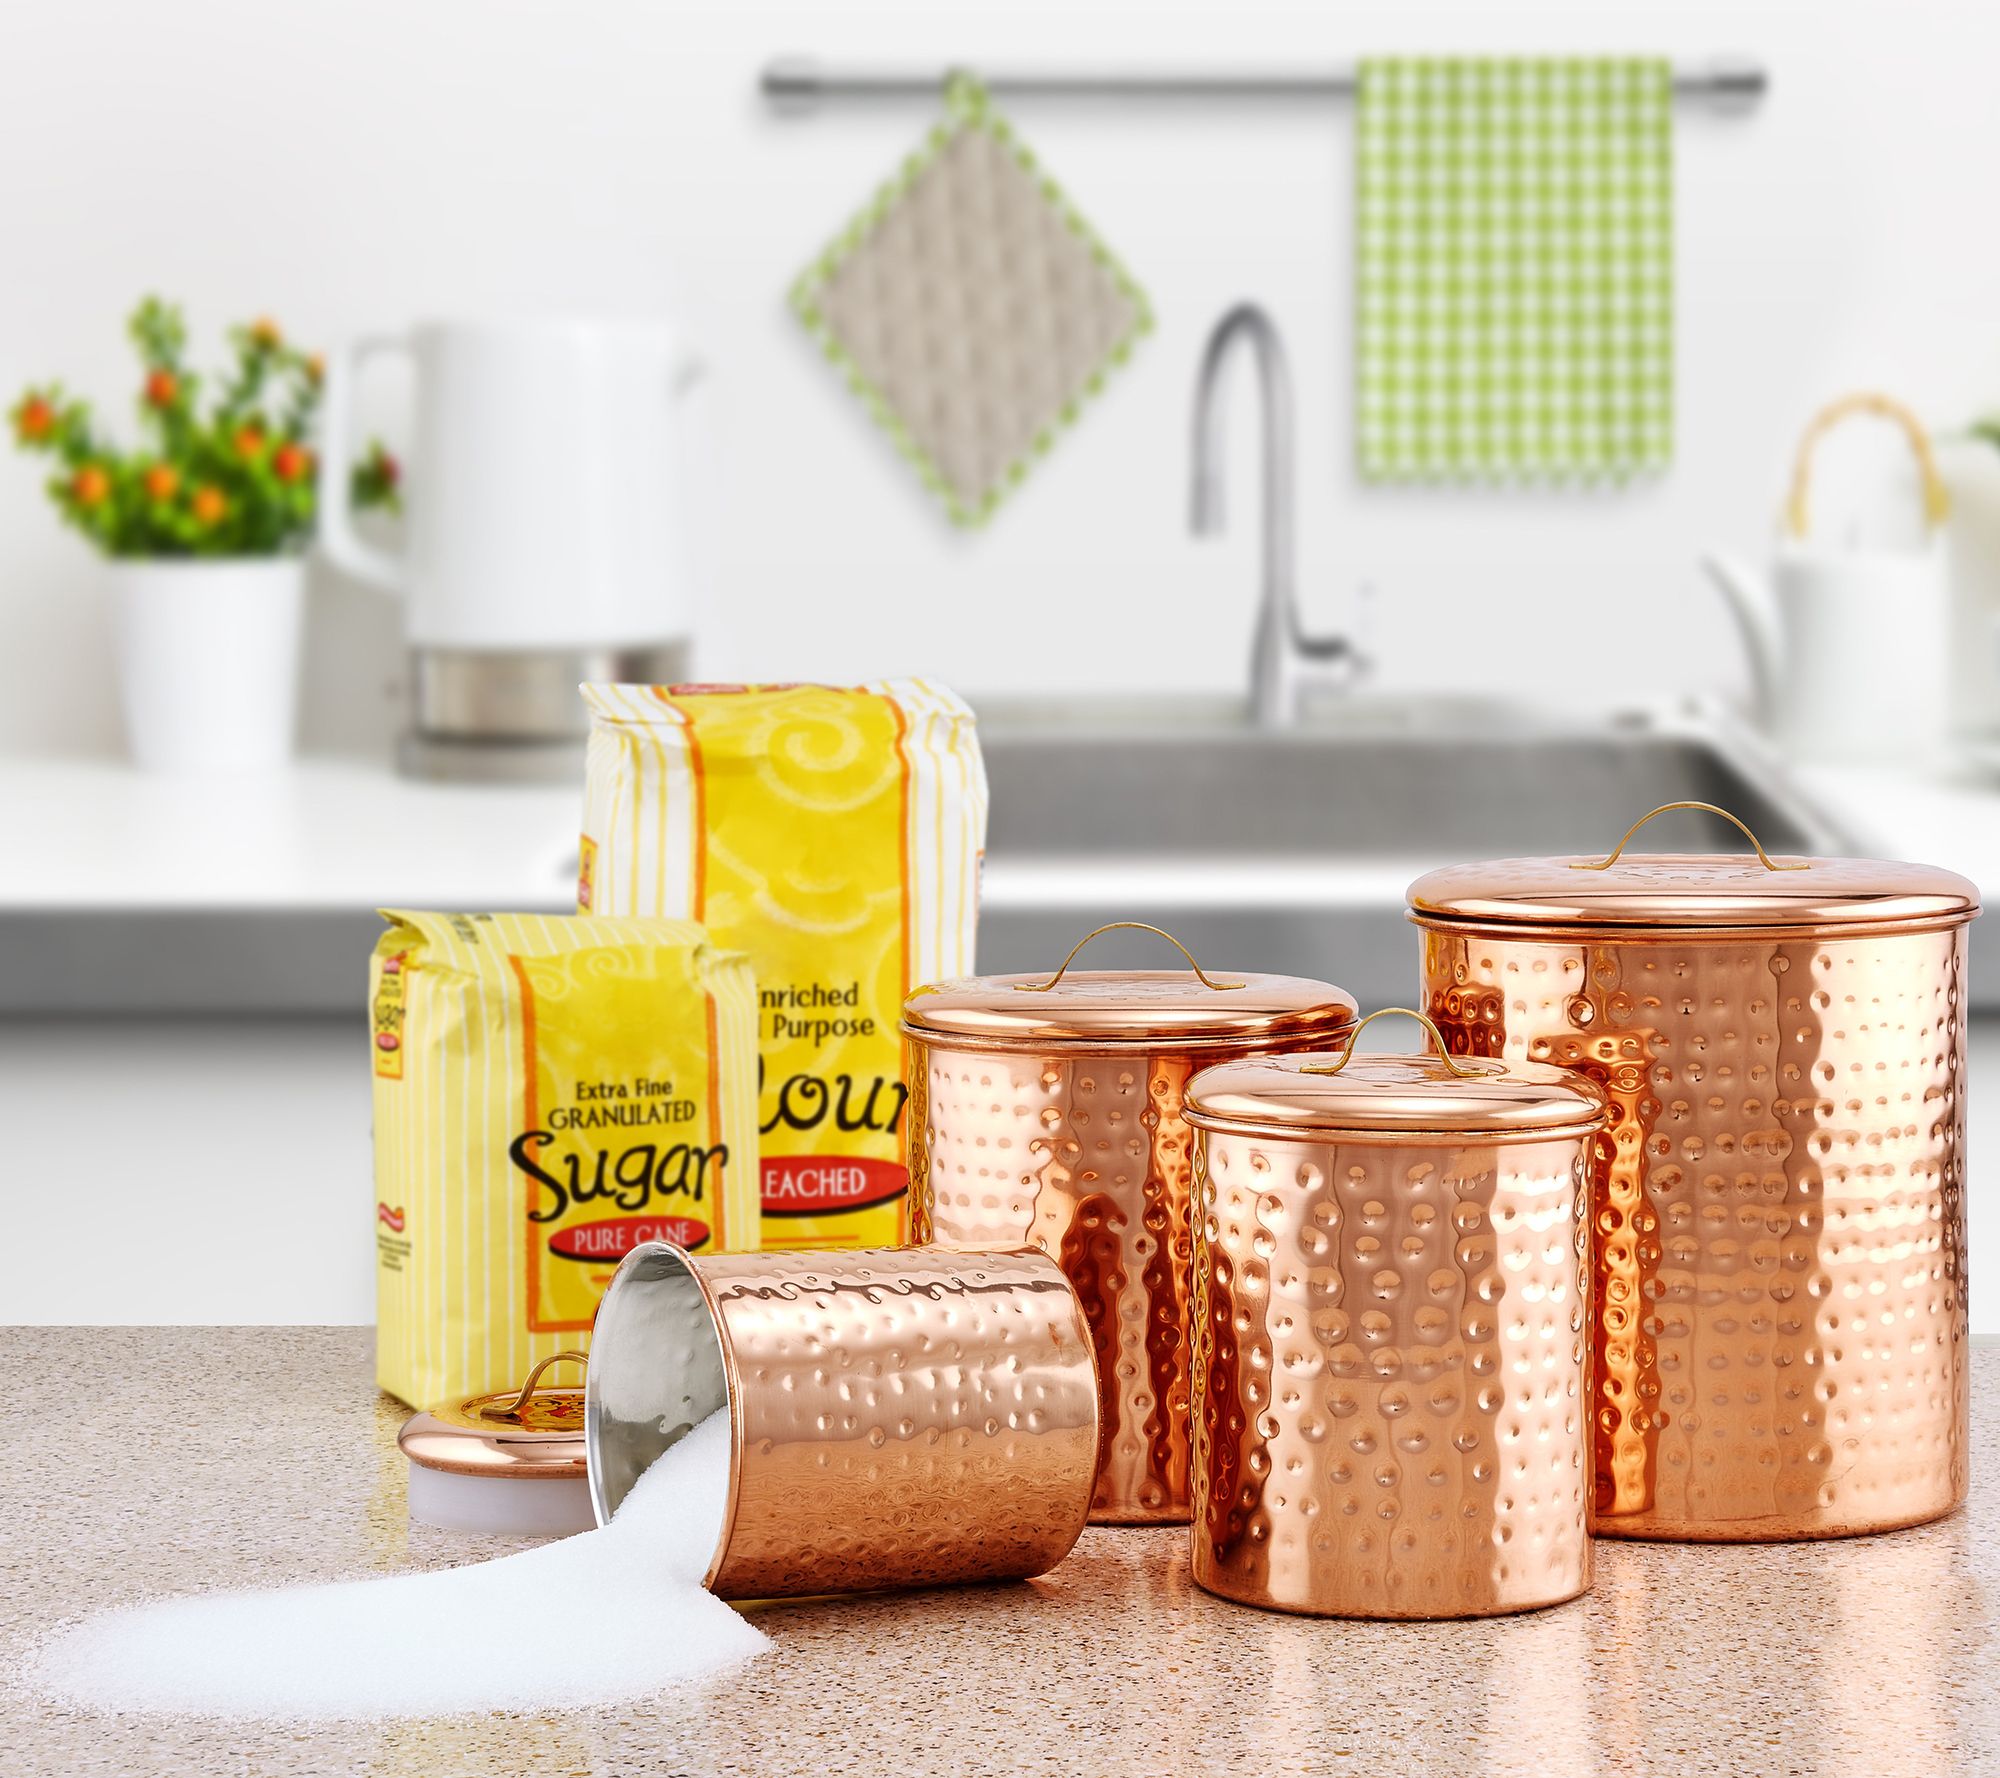 Recycled Copper Kitchen Canisters - Available on Made Trade – Made Trade